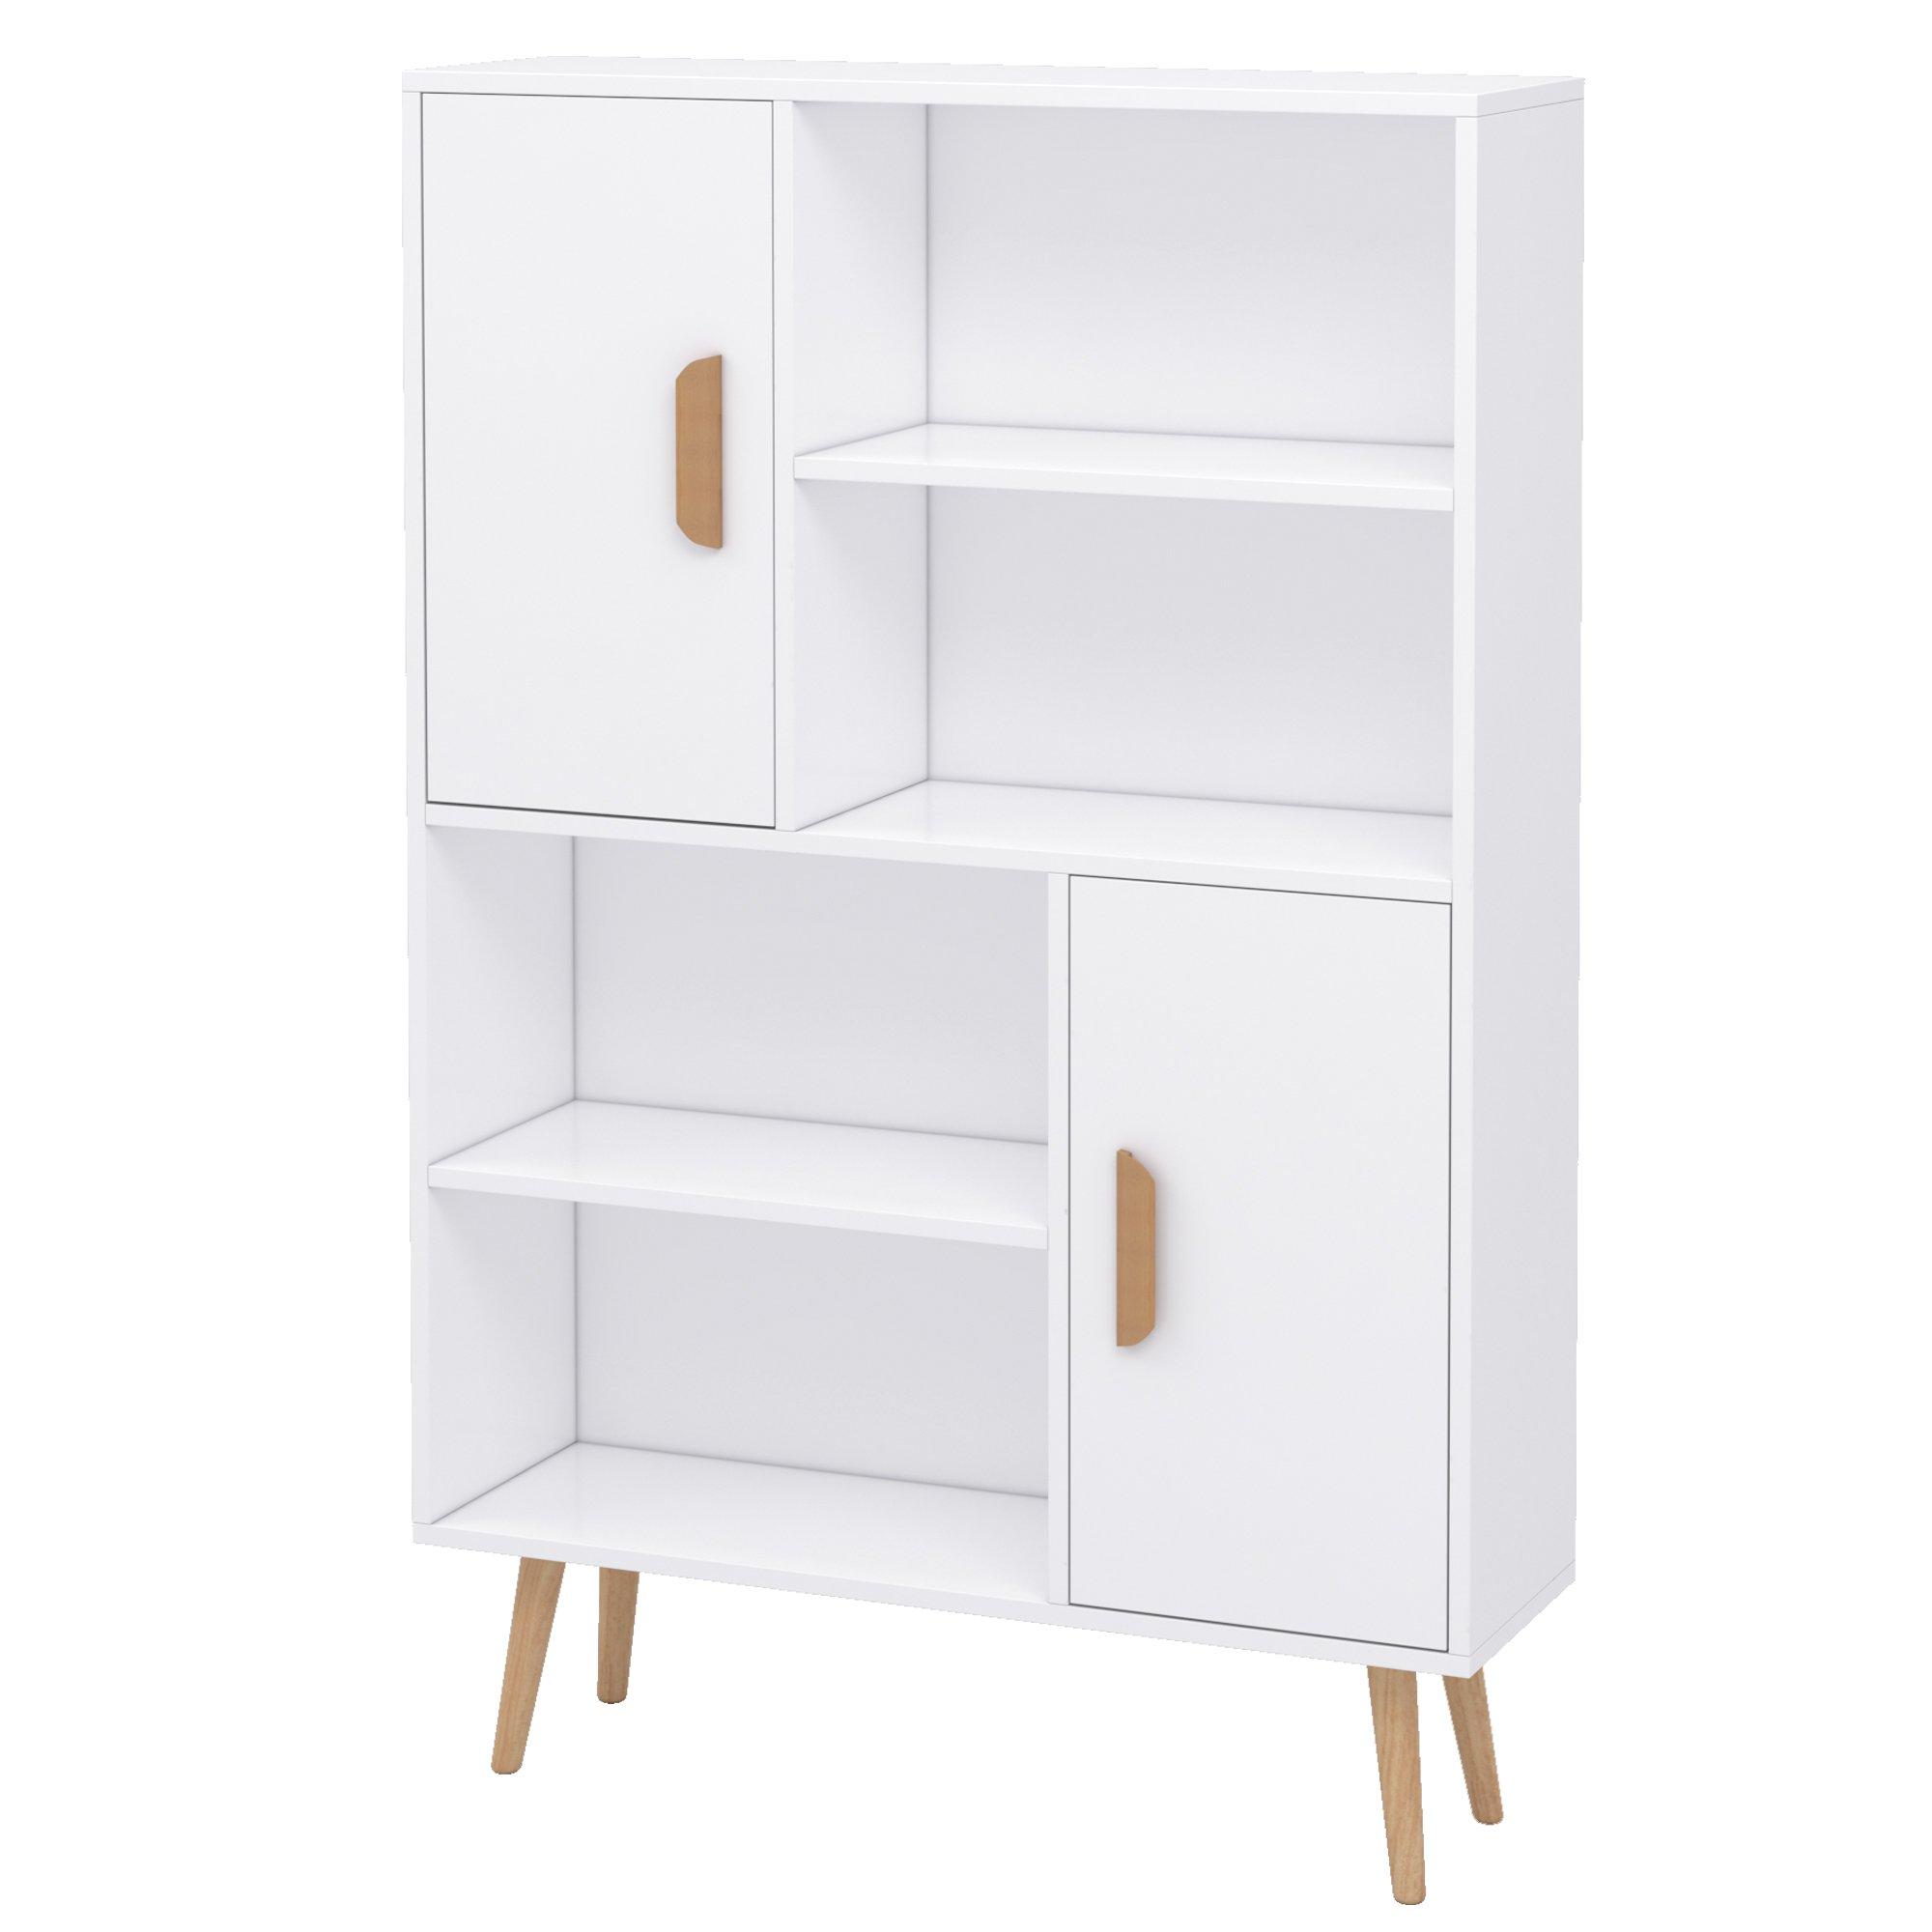 Free Standing Bookcase Shelves Unit Storage Cabinet Two Doors Wooden